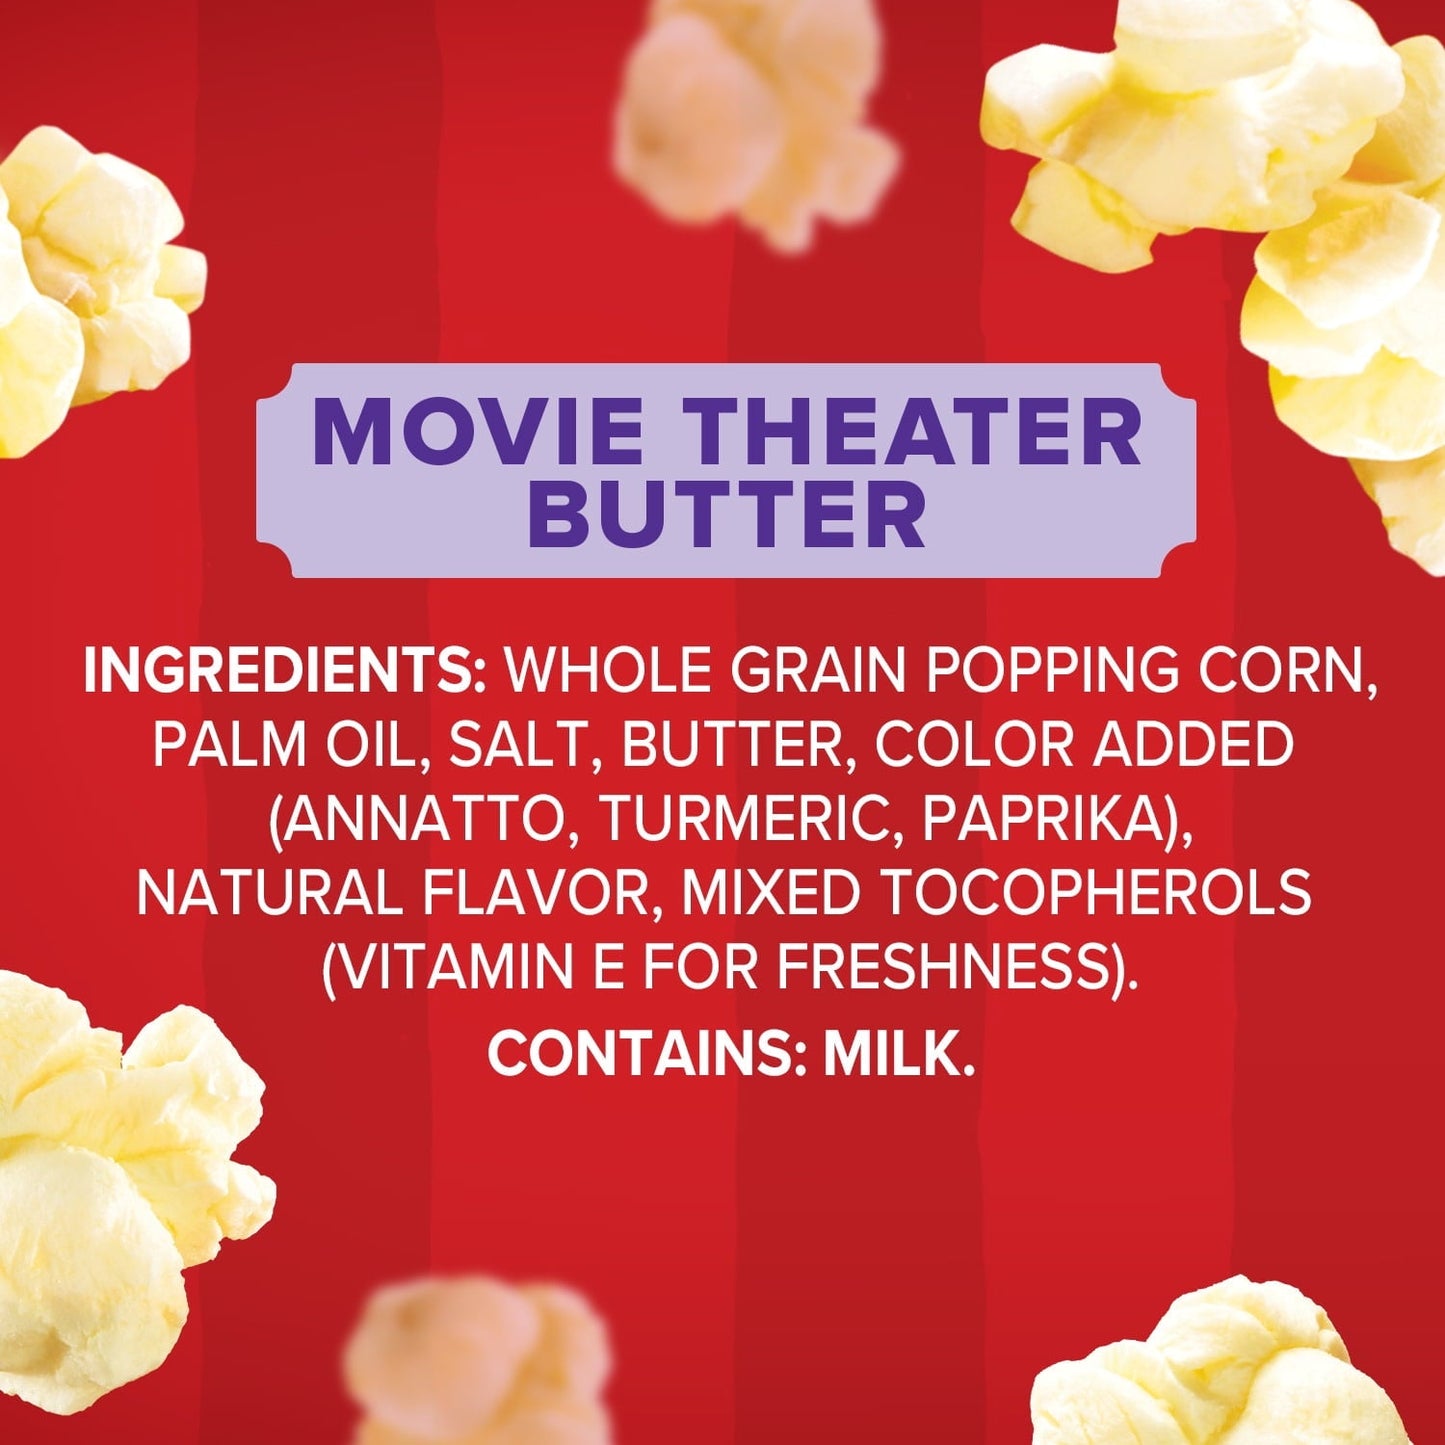 Orville Redenbacher's Movie Theater Butter Microwave Popcorn, 3 Ounce Classic Bag, 18-Count